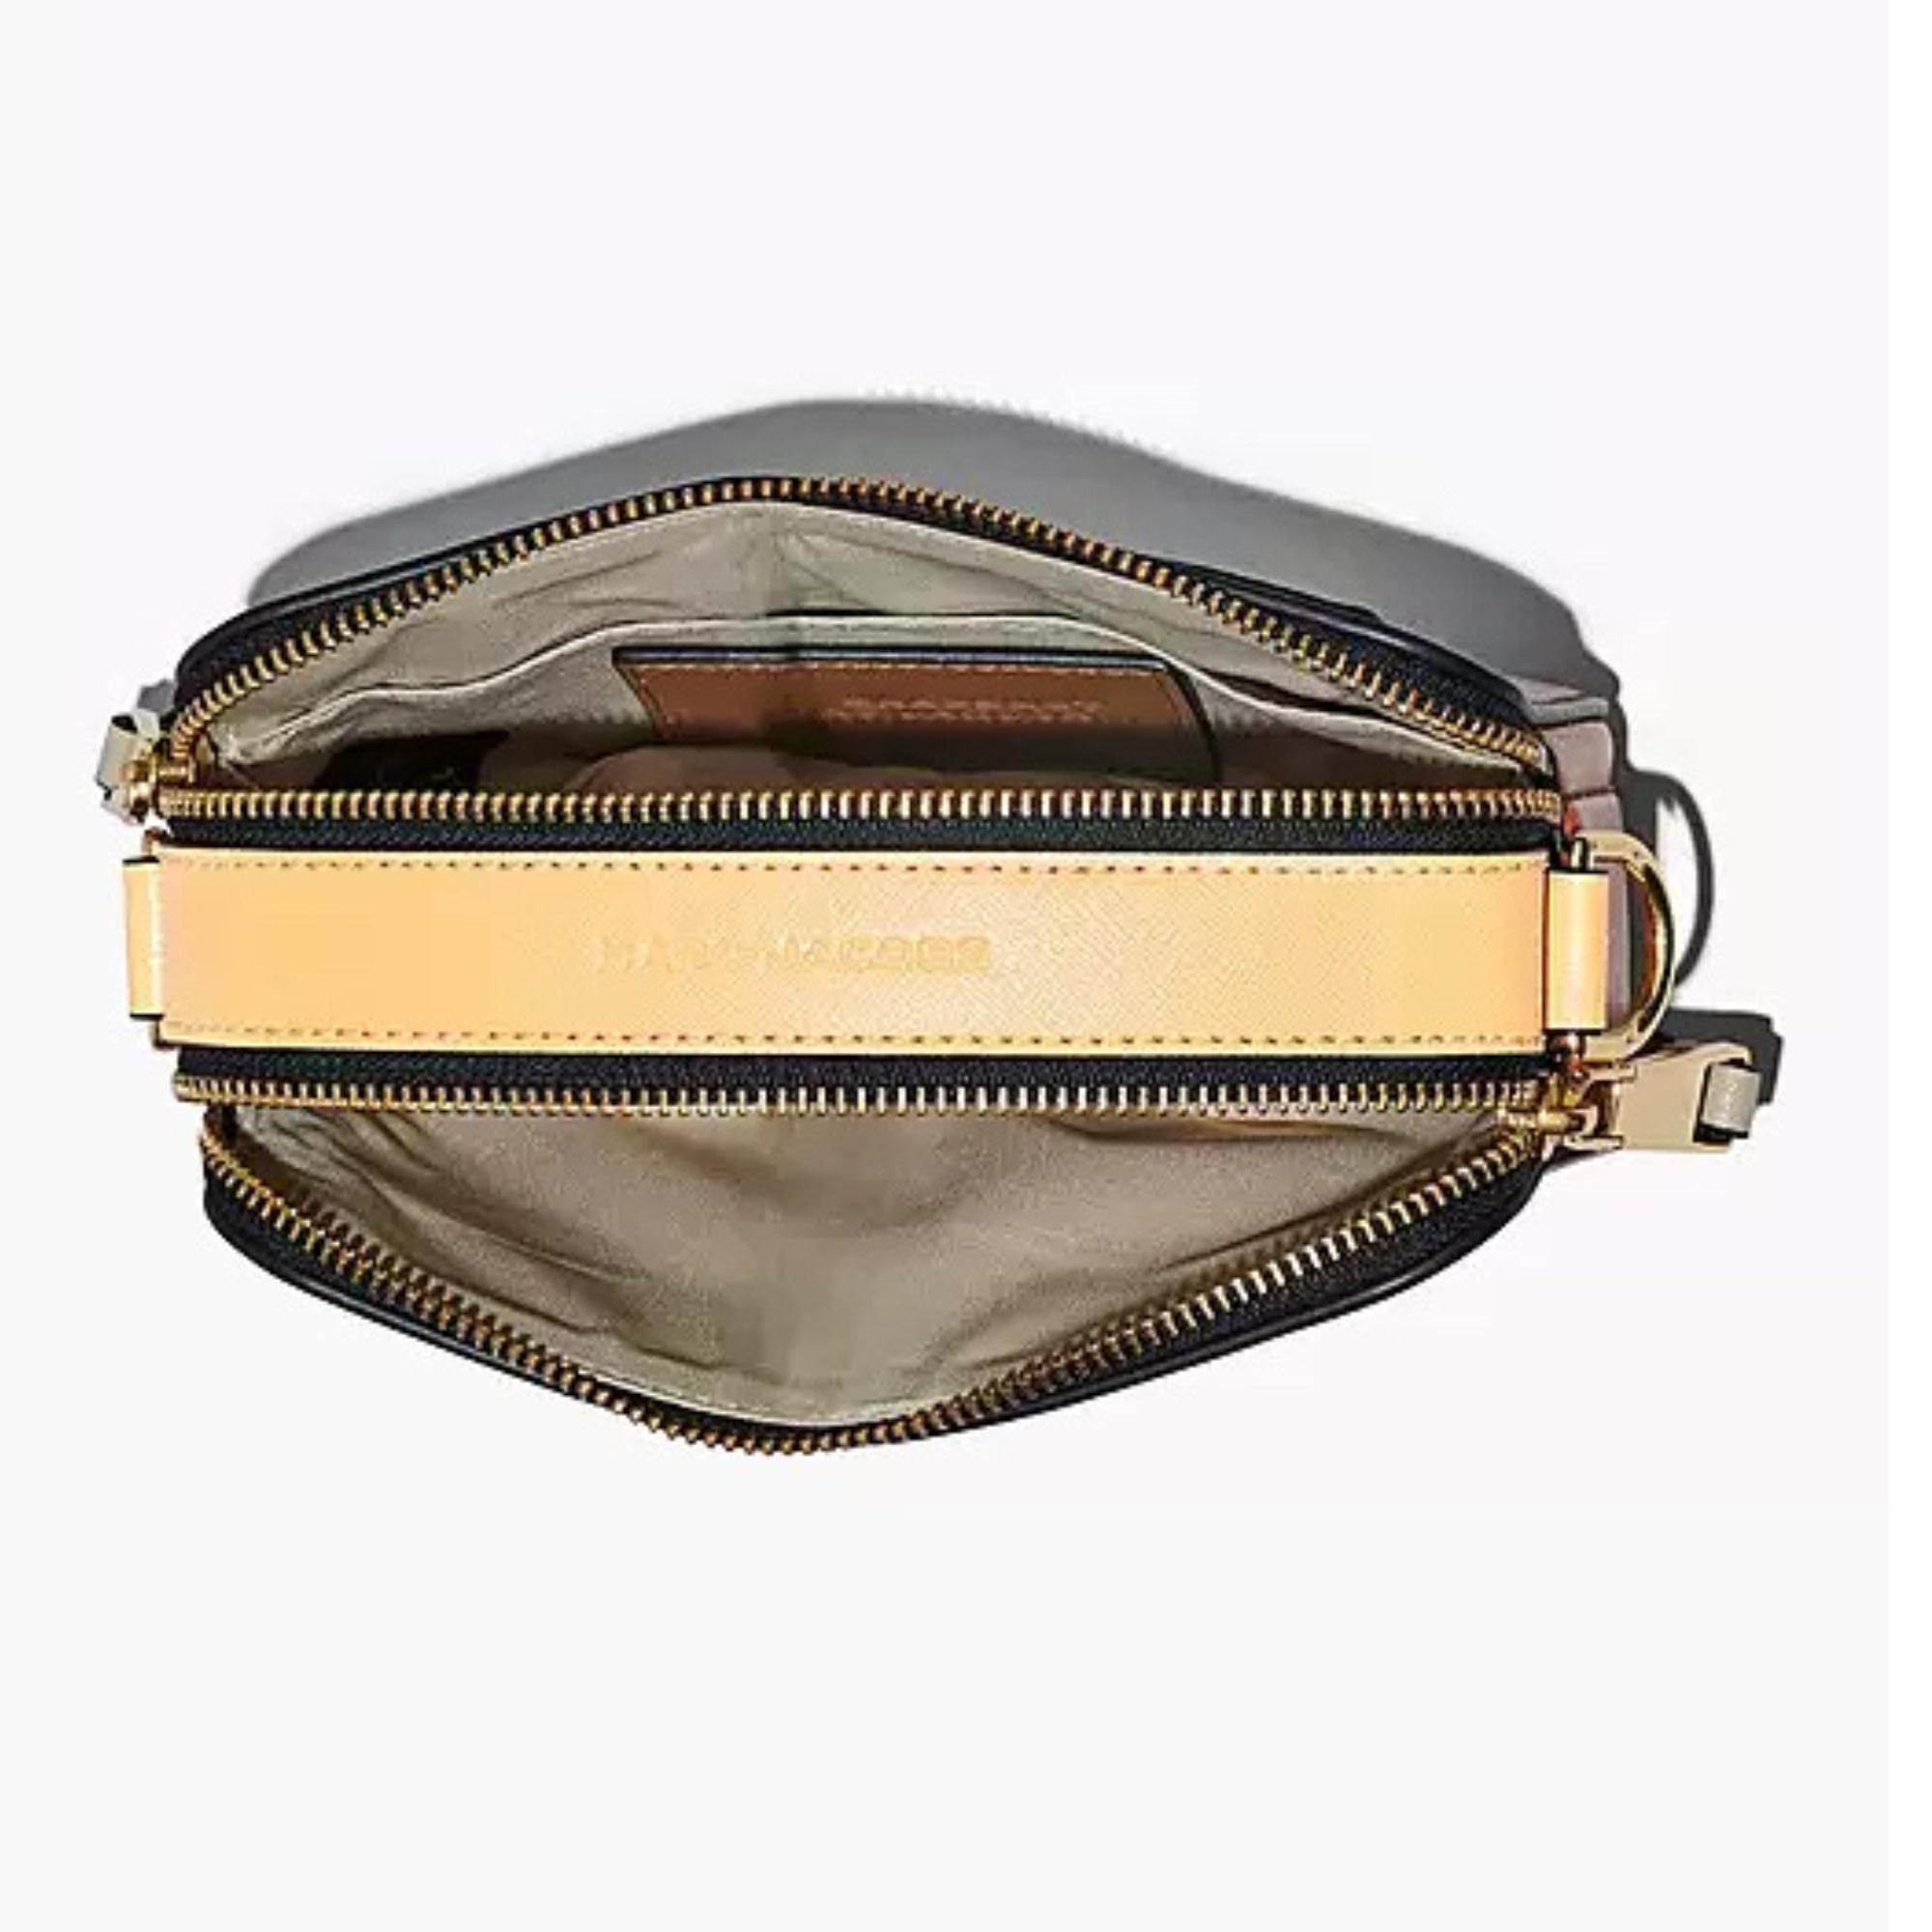 MARC JACOBS THE SNAPSHOT LEATHER BROWN CAMERA BAG - CRTBLNCHSHP